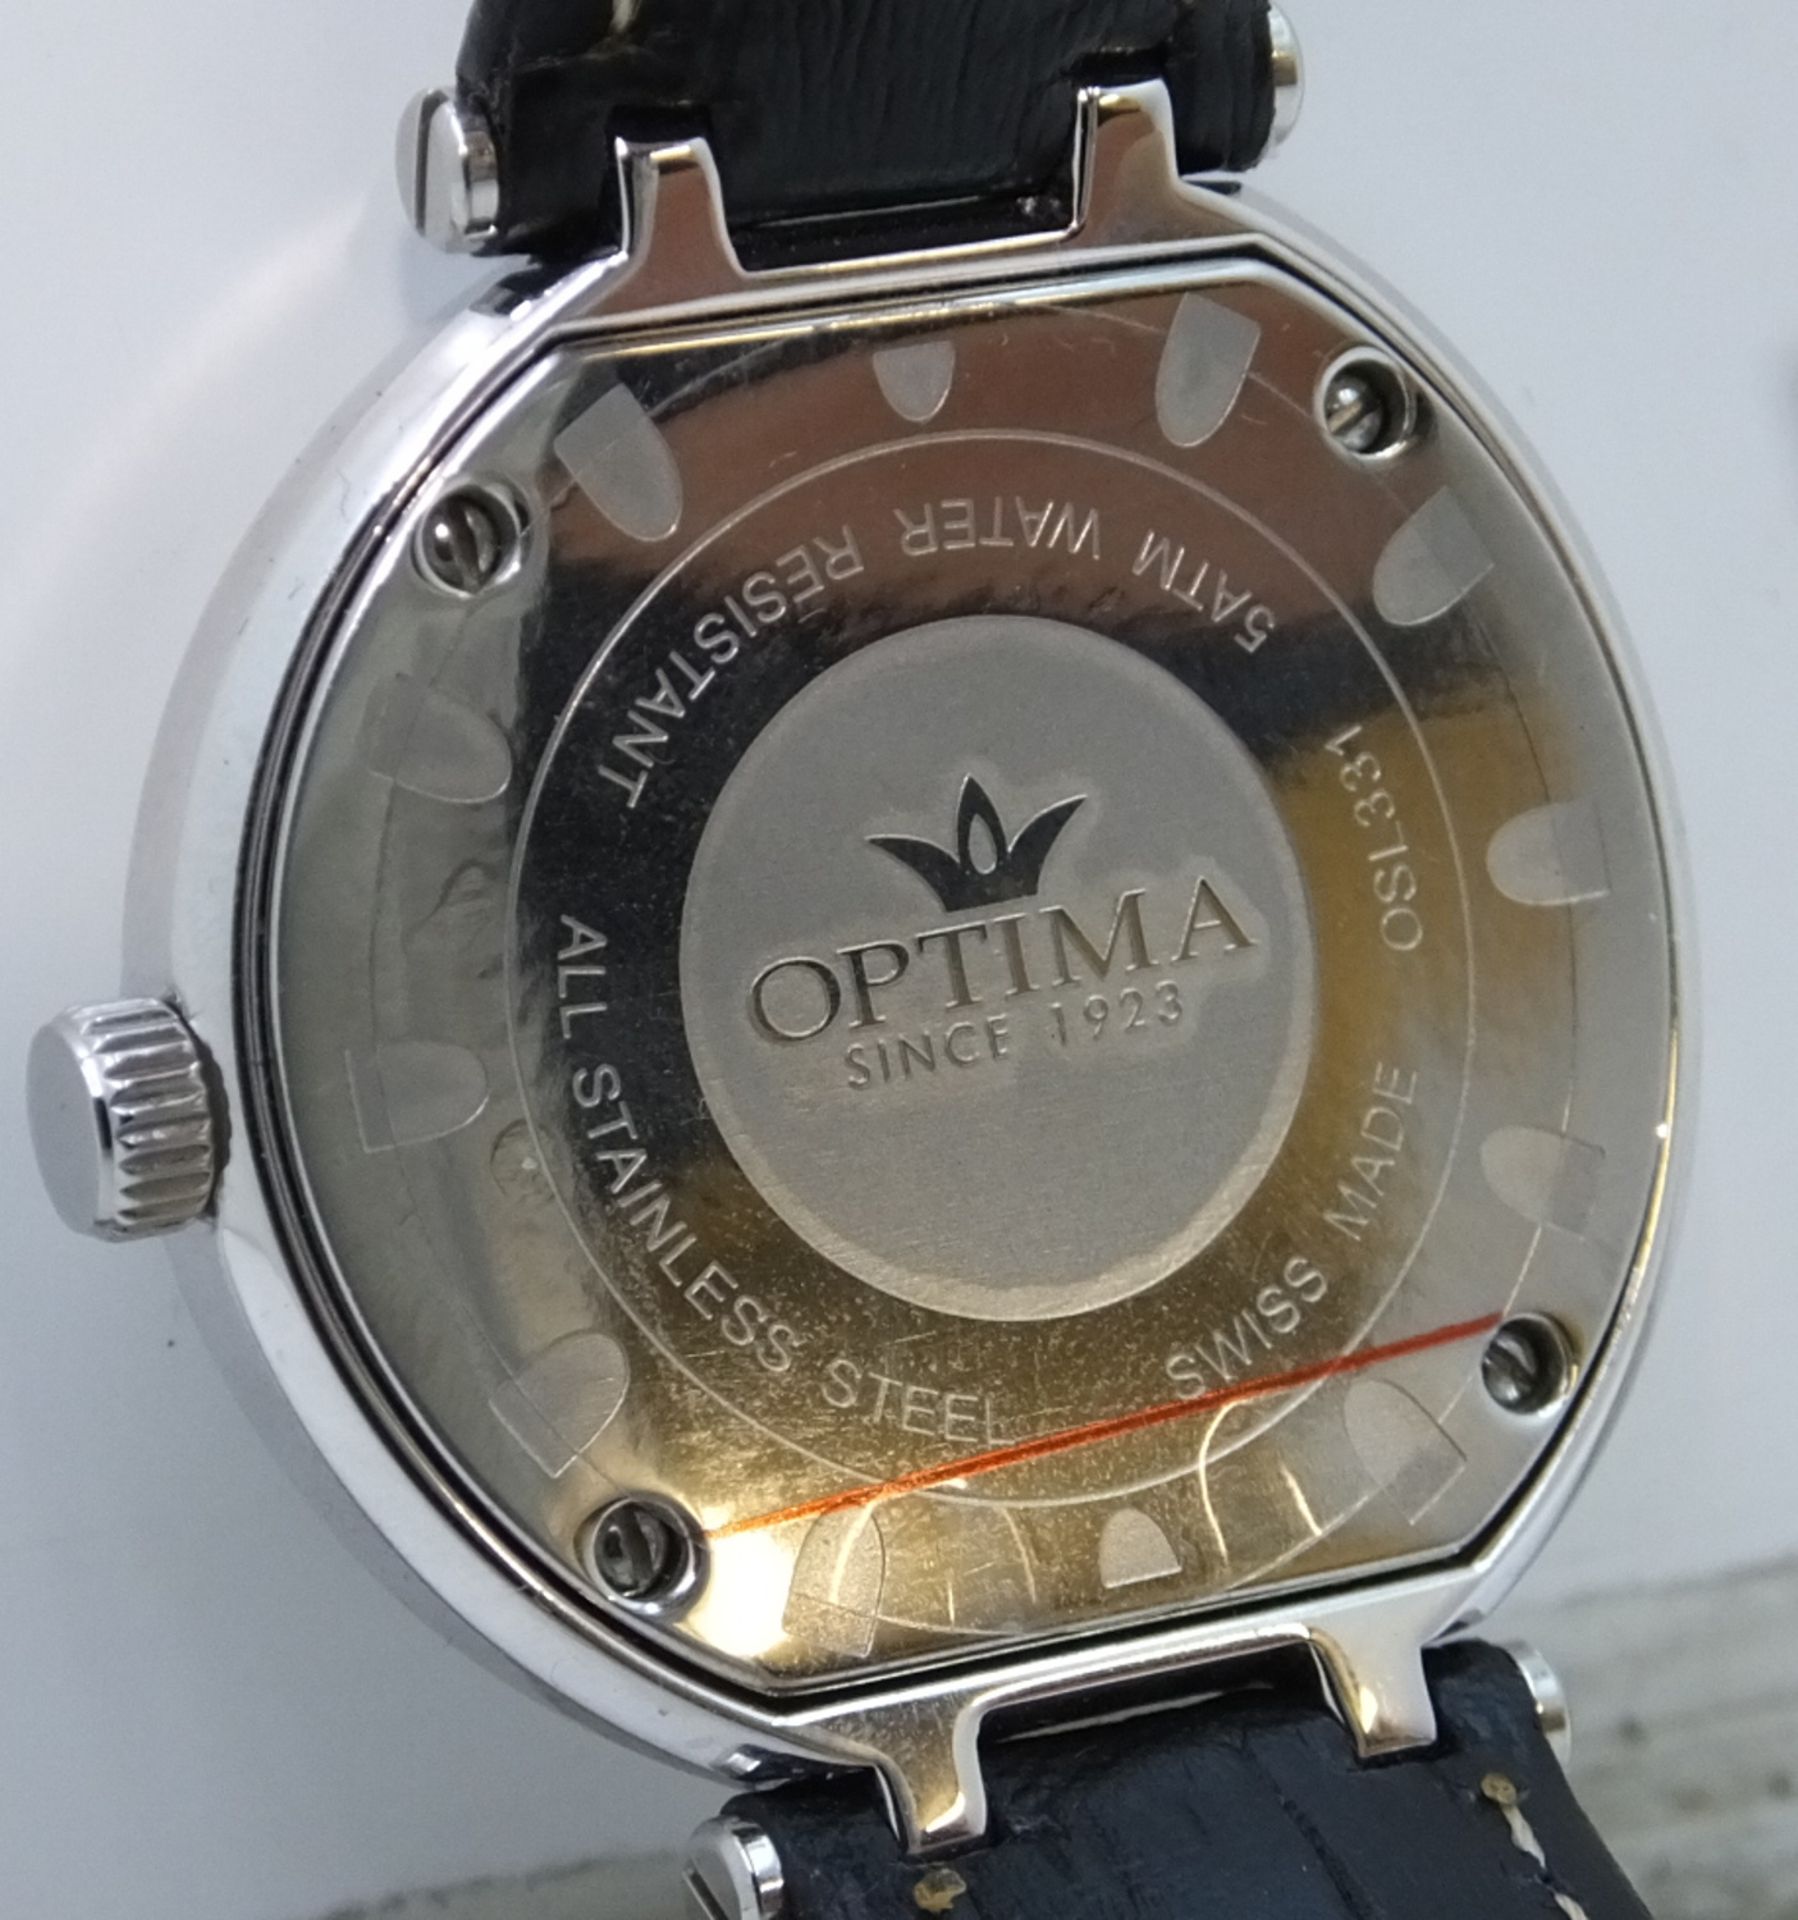 Optima OSL331 Ladies Stainless Steel Watch with Leather Strap - Image 4 of 4